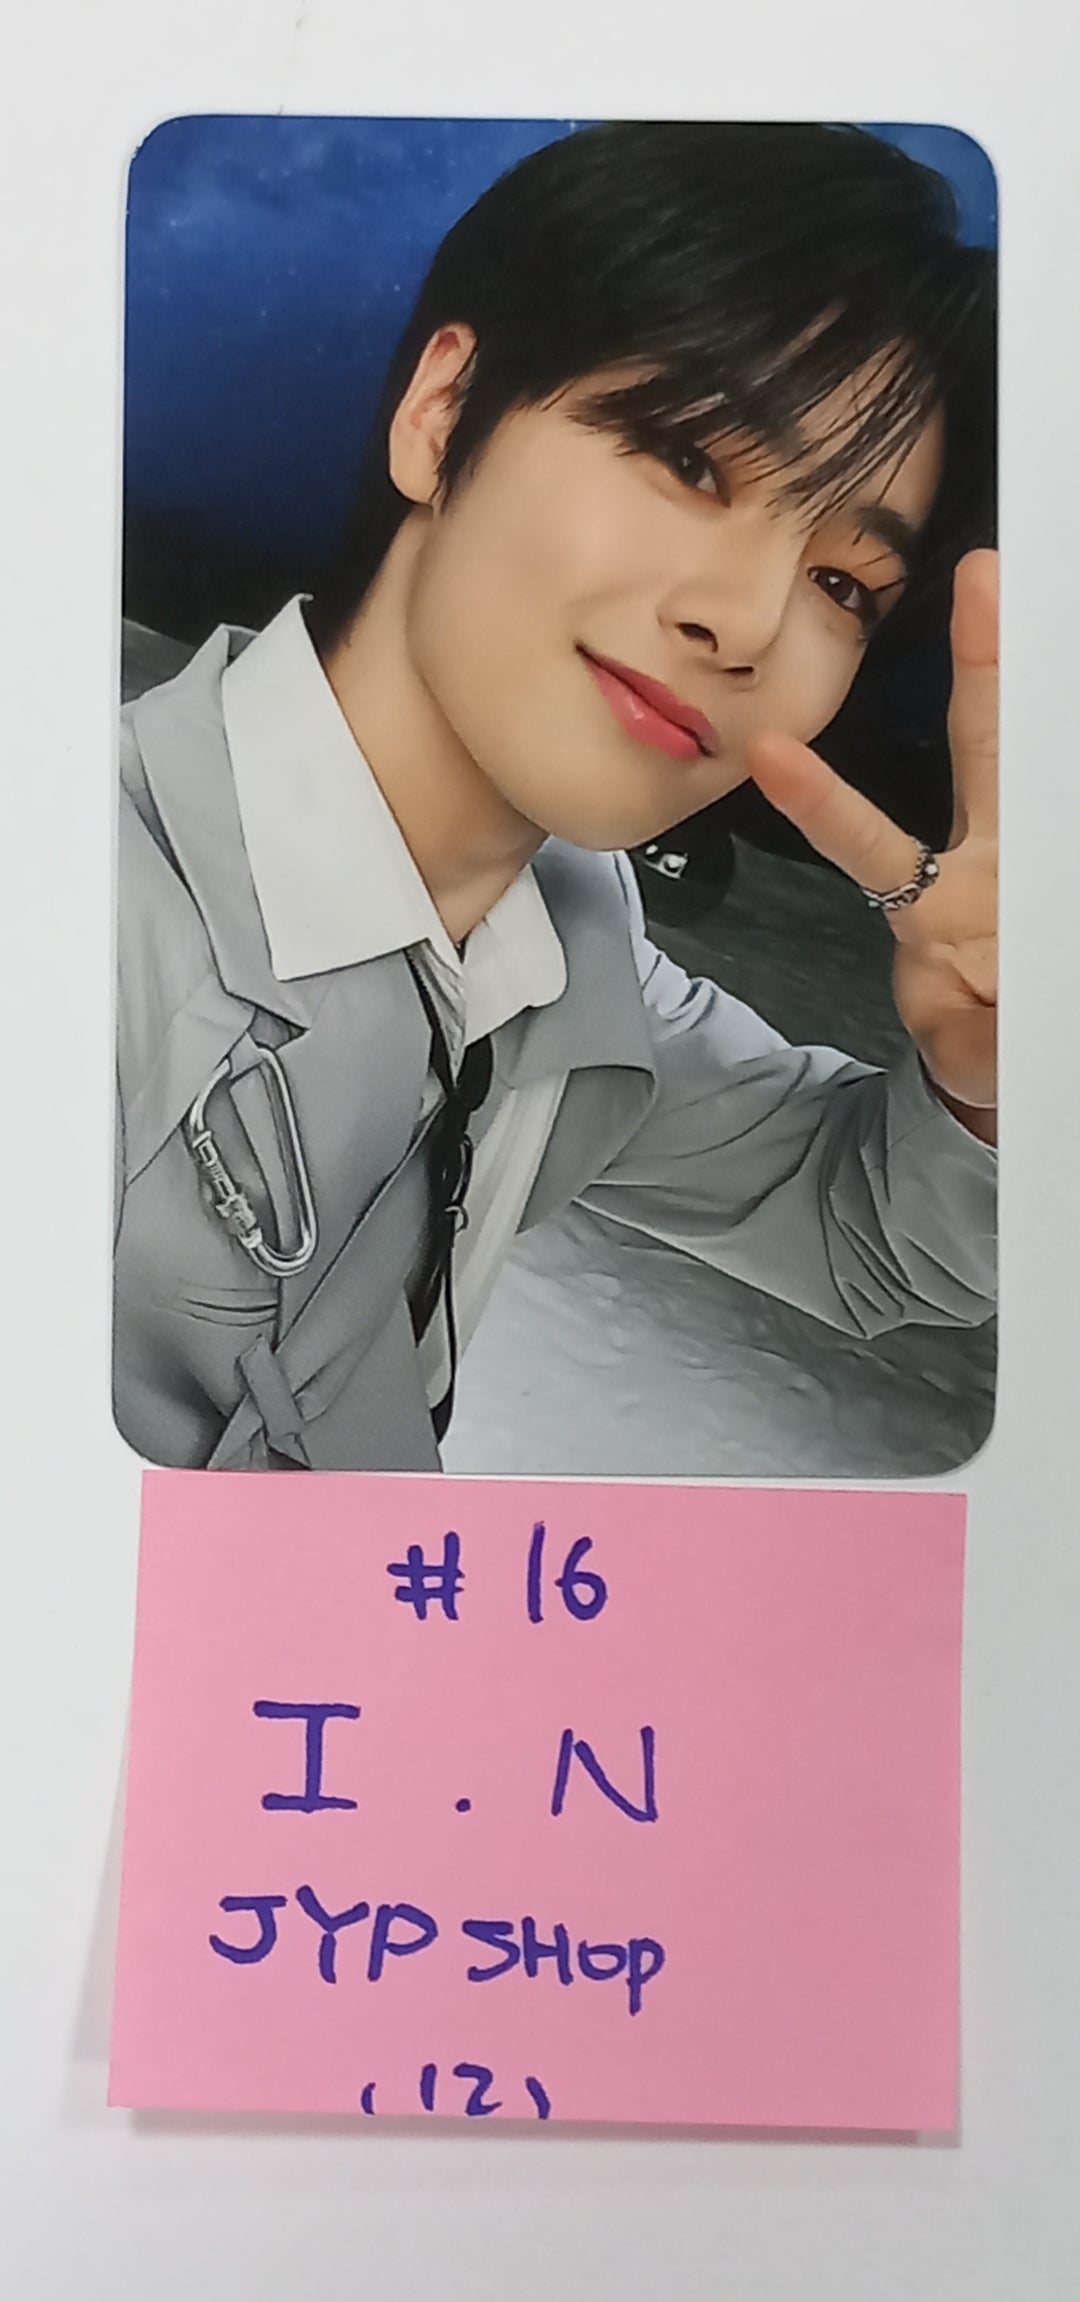 Stray Kids "PILOT : FOR ★★★★★" - JYP Shop MD Event Photocard [23.10.10]